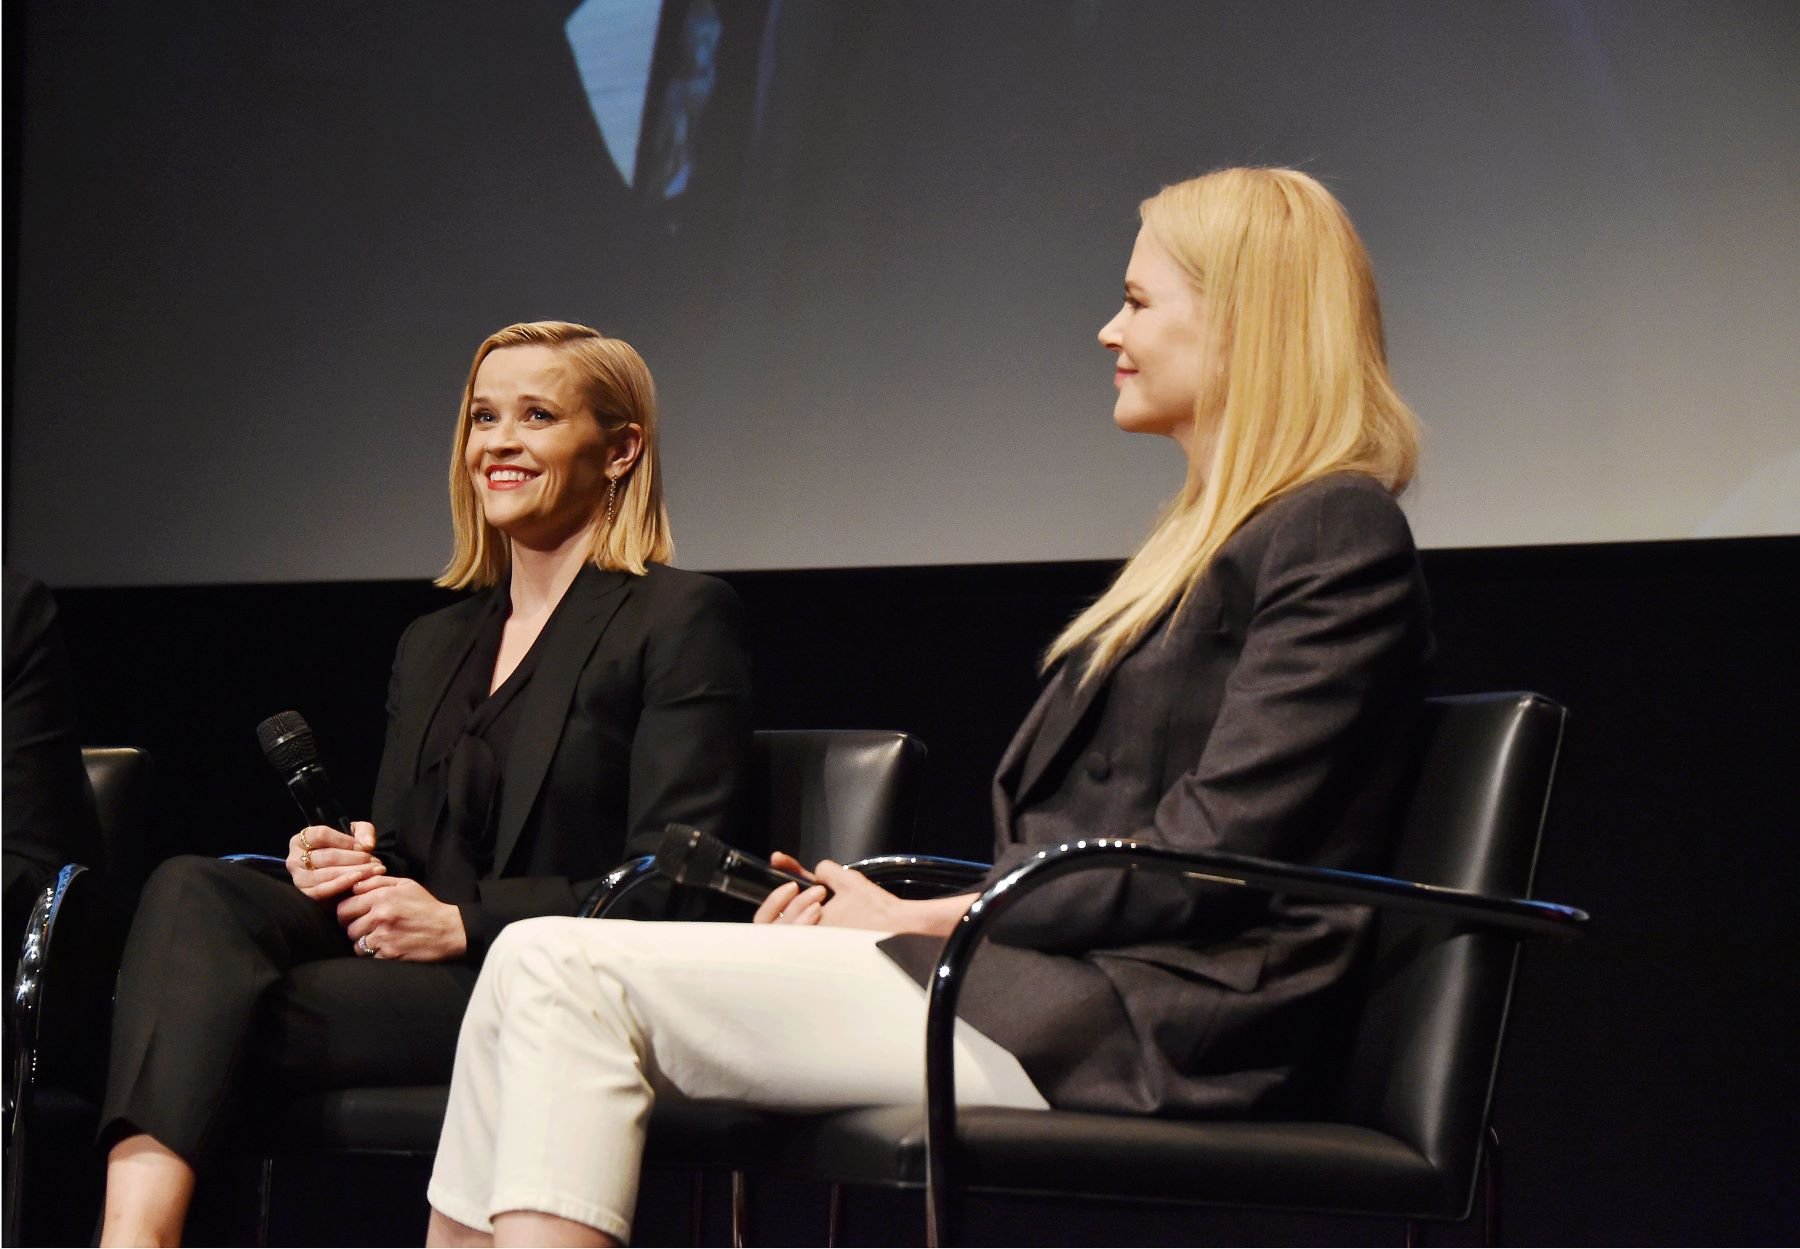 Reese Witherspoon and Nicole Kidman of 'Big Little Lies' at the Hammer Museum in Los Angeles, California